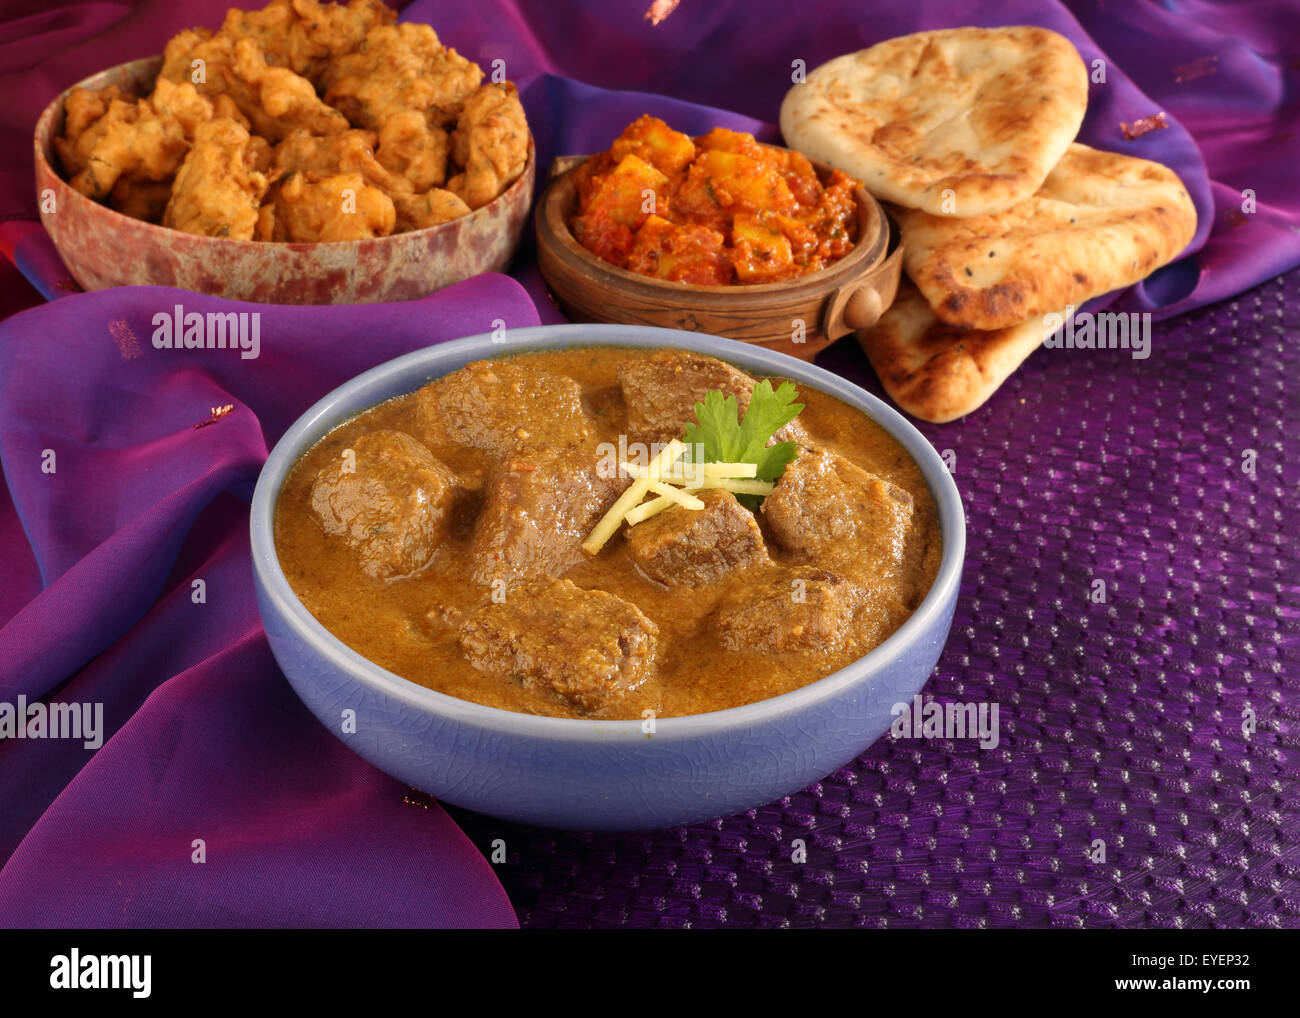 INDIAN LAMB MADRAS MEAT CURRY MEAL Stock Photo